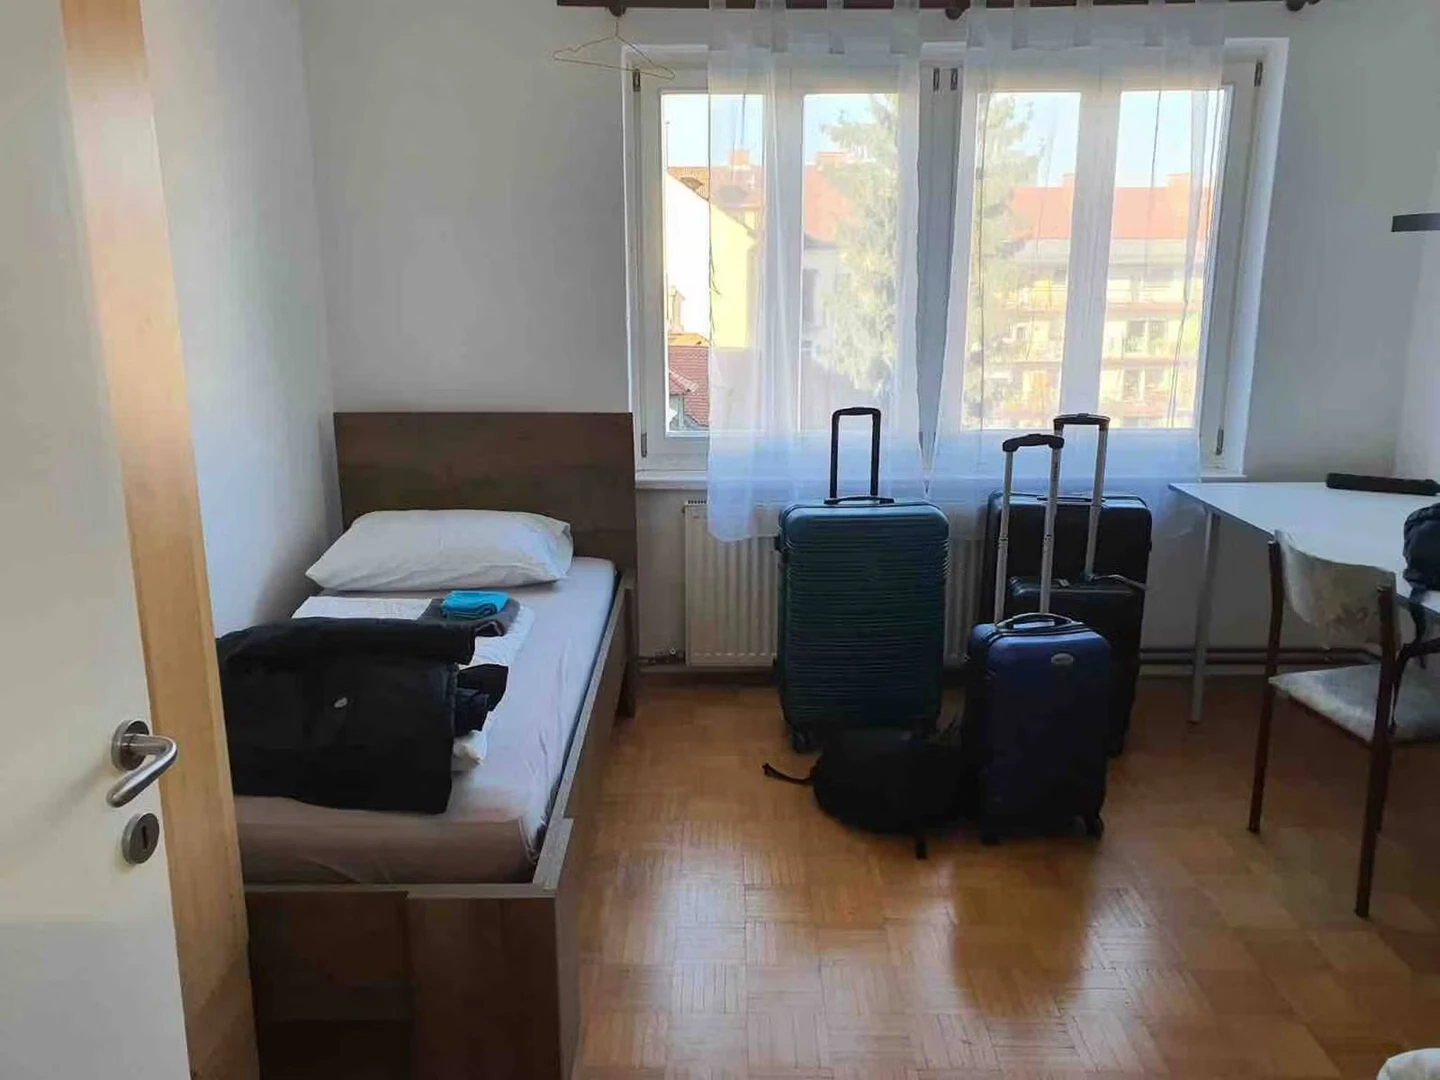 Shared room with another student in ljubljana